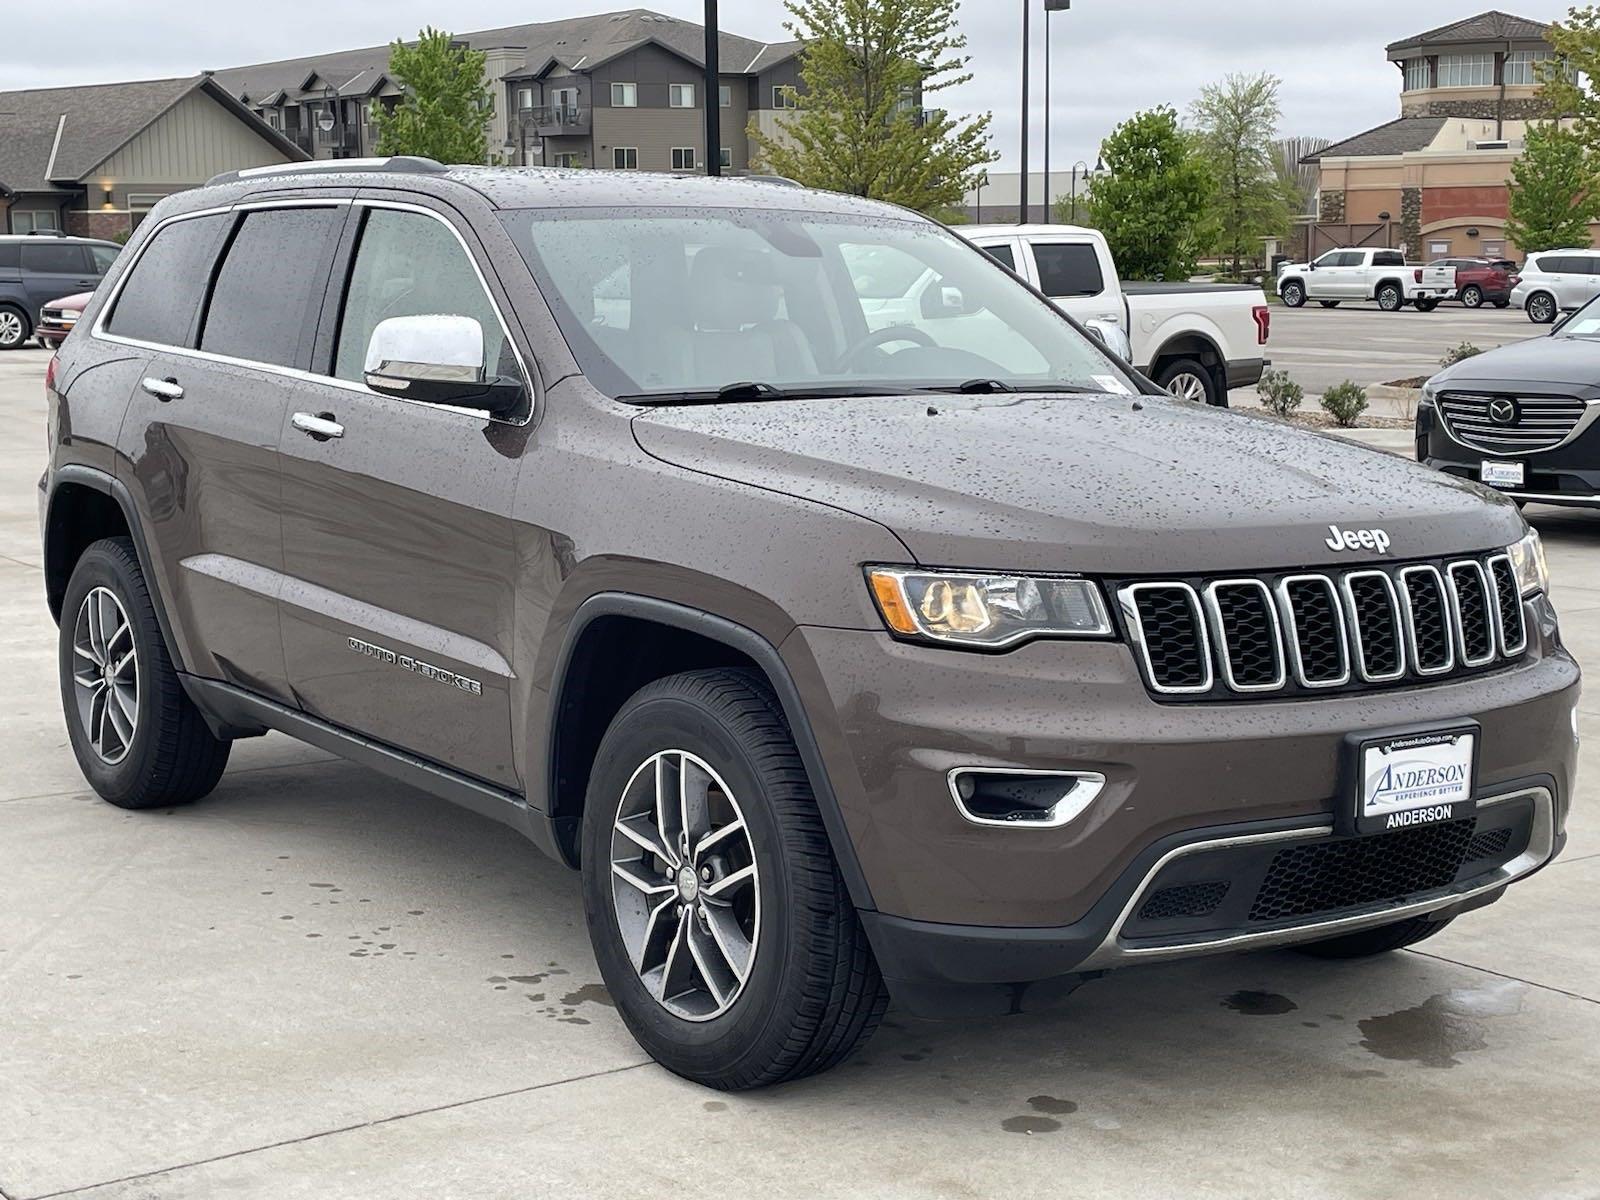 Used 2018 Jeep Grand Cherokee Limited Sport Utility for sale in Lincoln NE